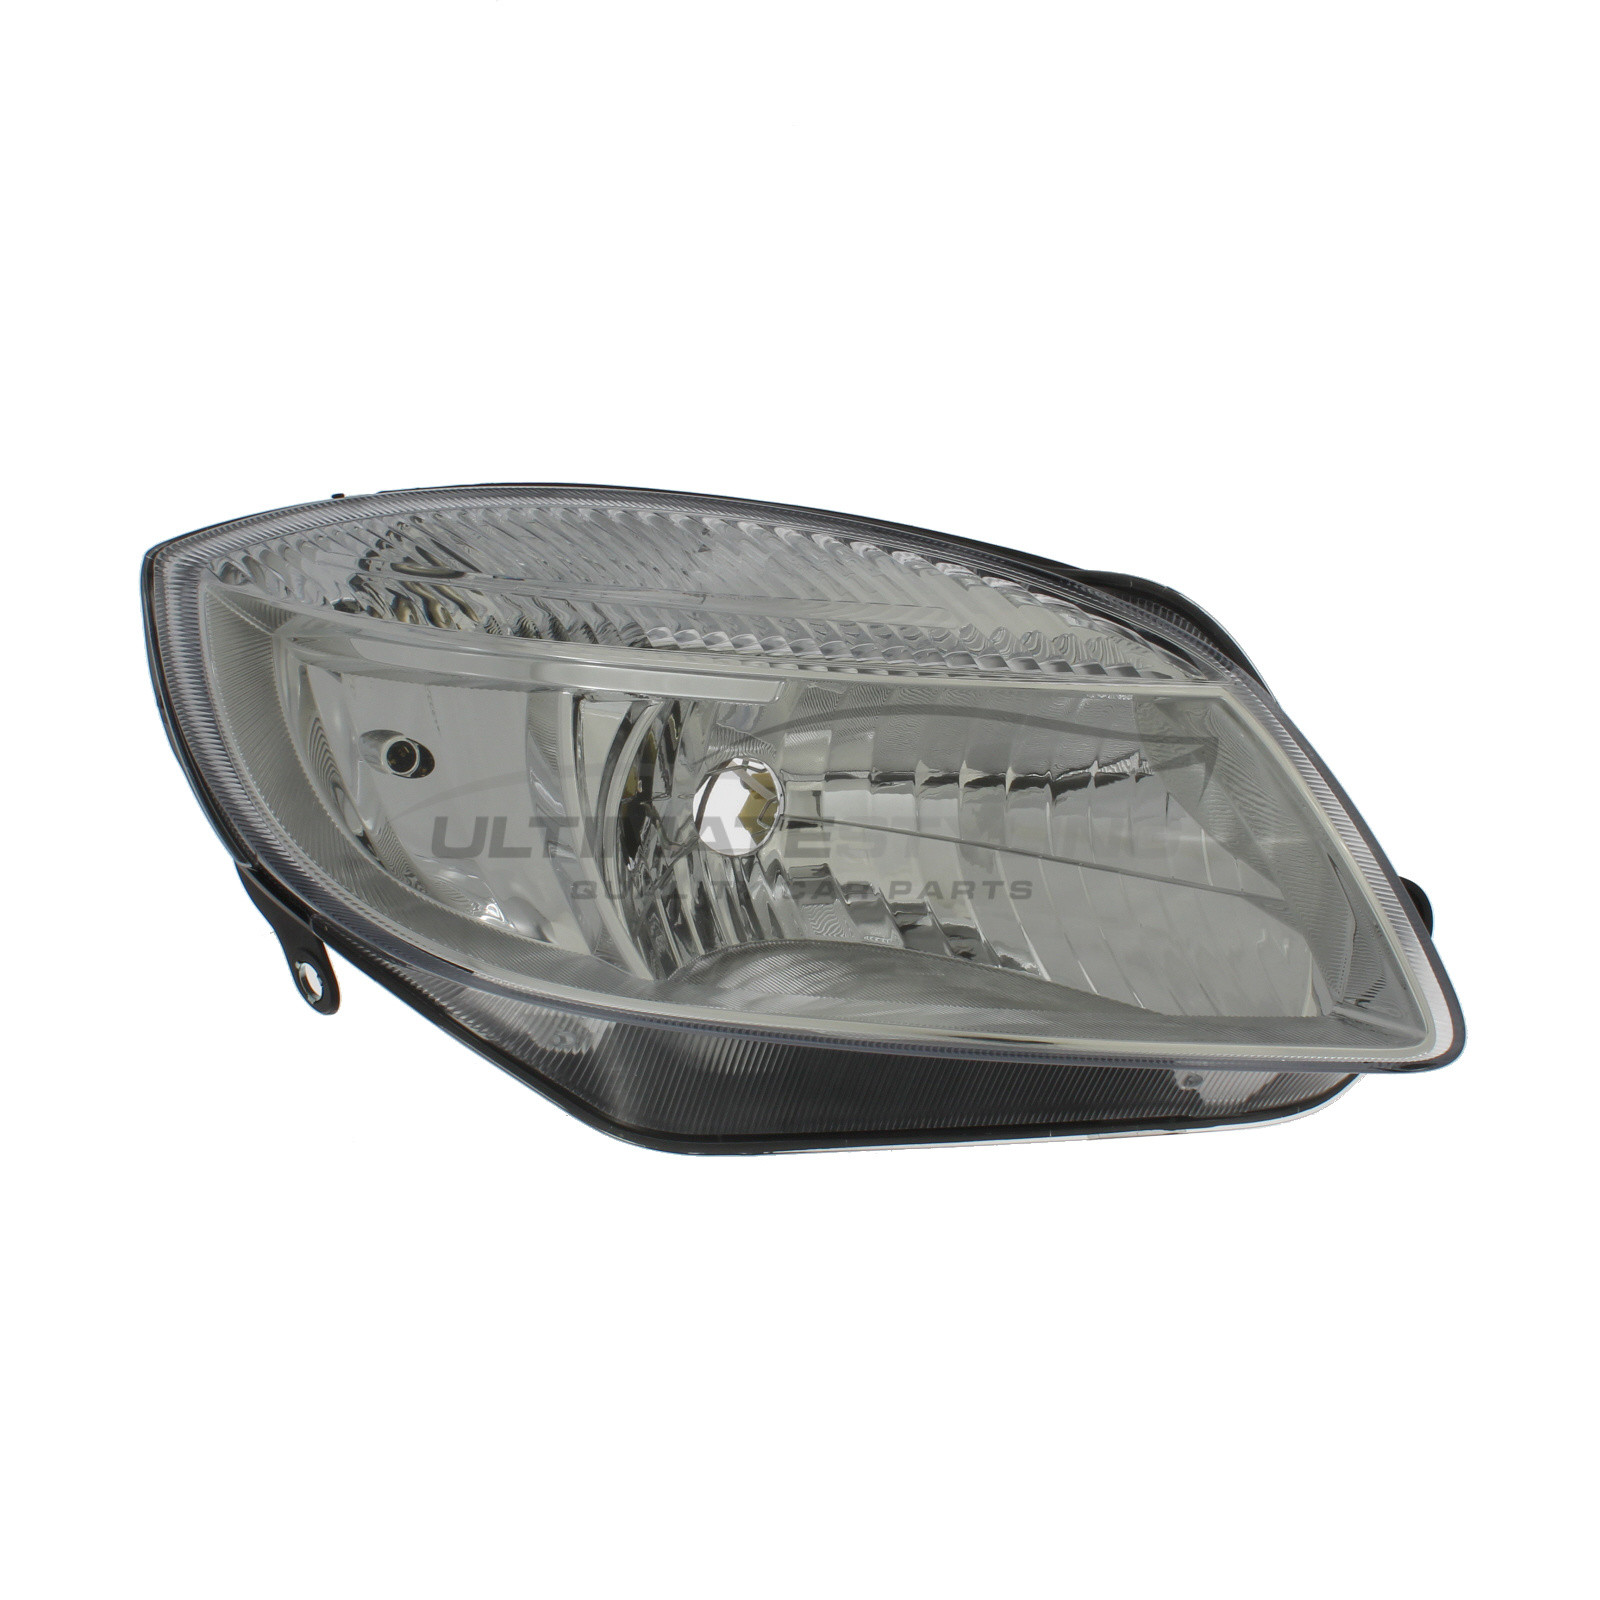 Skoda Fabia 2007-2010, Roomster 2006-2010 Halogen, Electric With Motor, Chrome Headlight / Headlamp (Non-Projector Type) Drivers Side (RH)